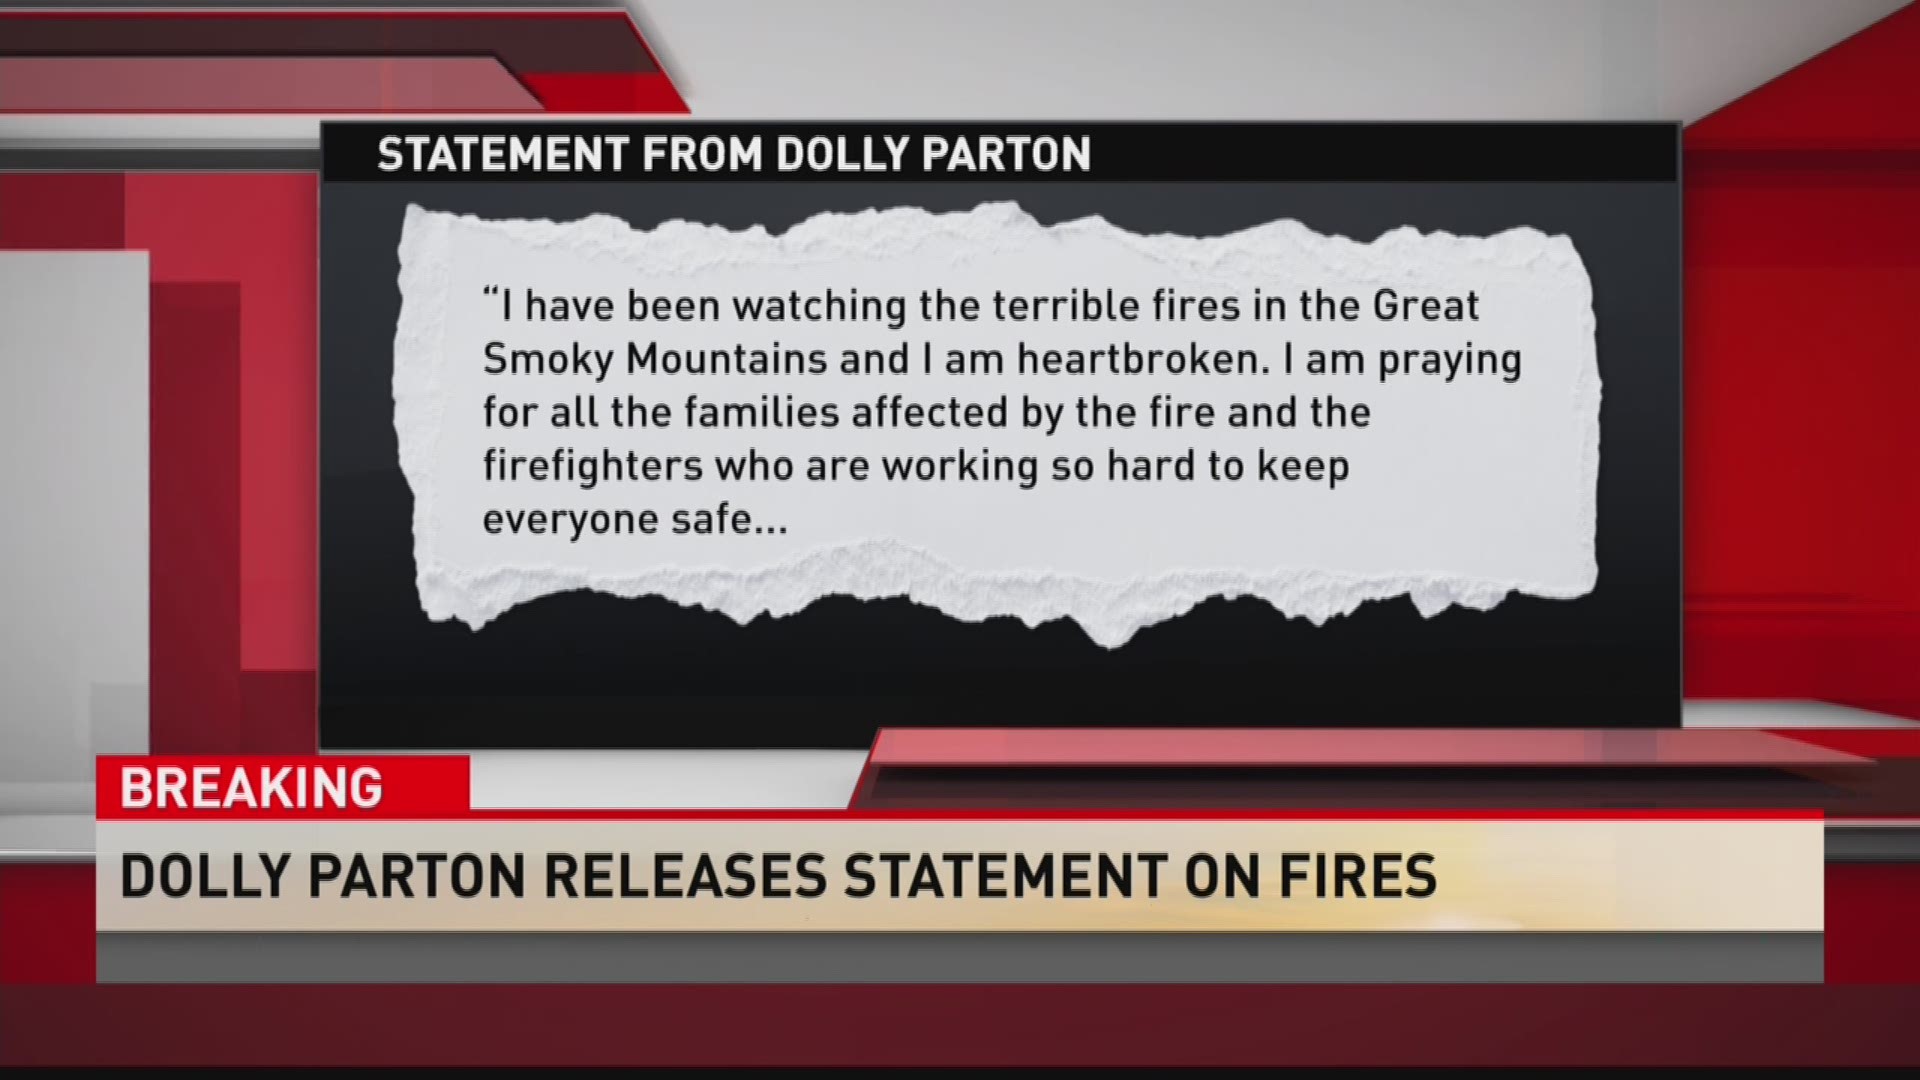 Dolly Parton has been known as a champion for the area impacted by wildfires.